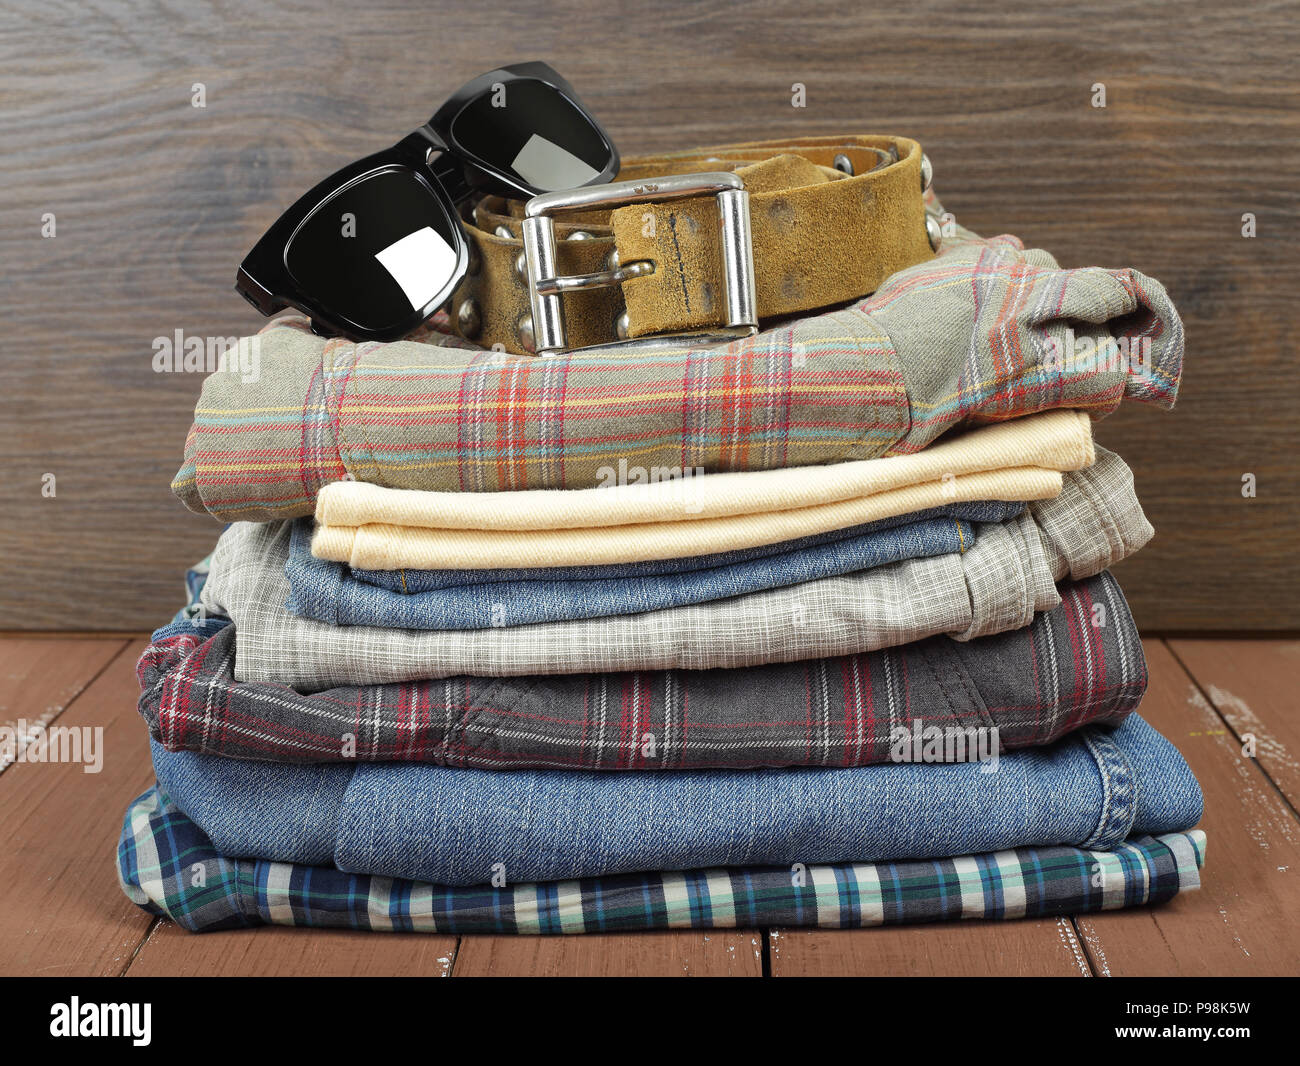 Pile Sunglasses High Resolution Stock Photography and Images - Alamy